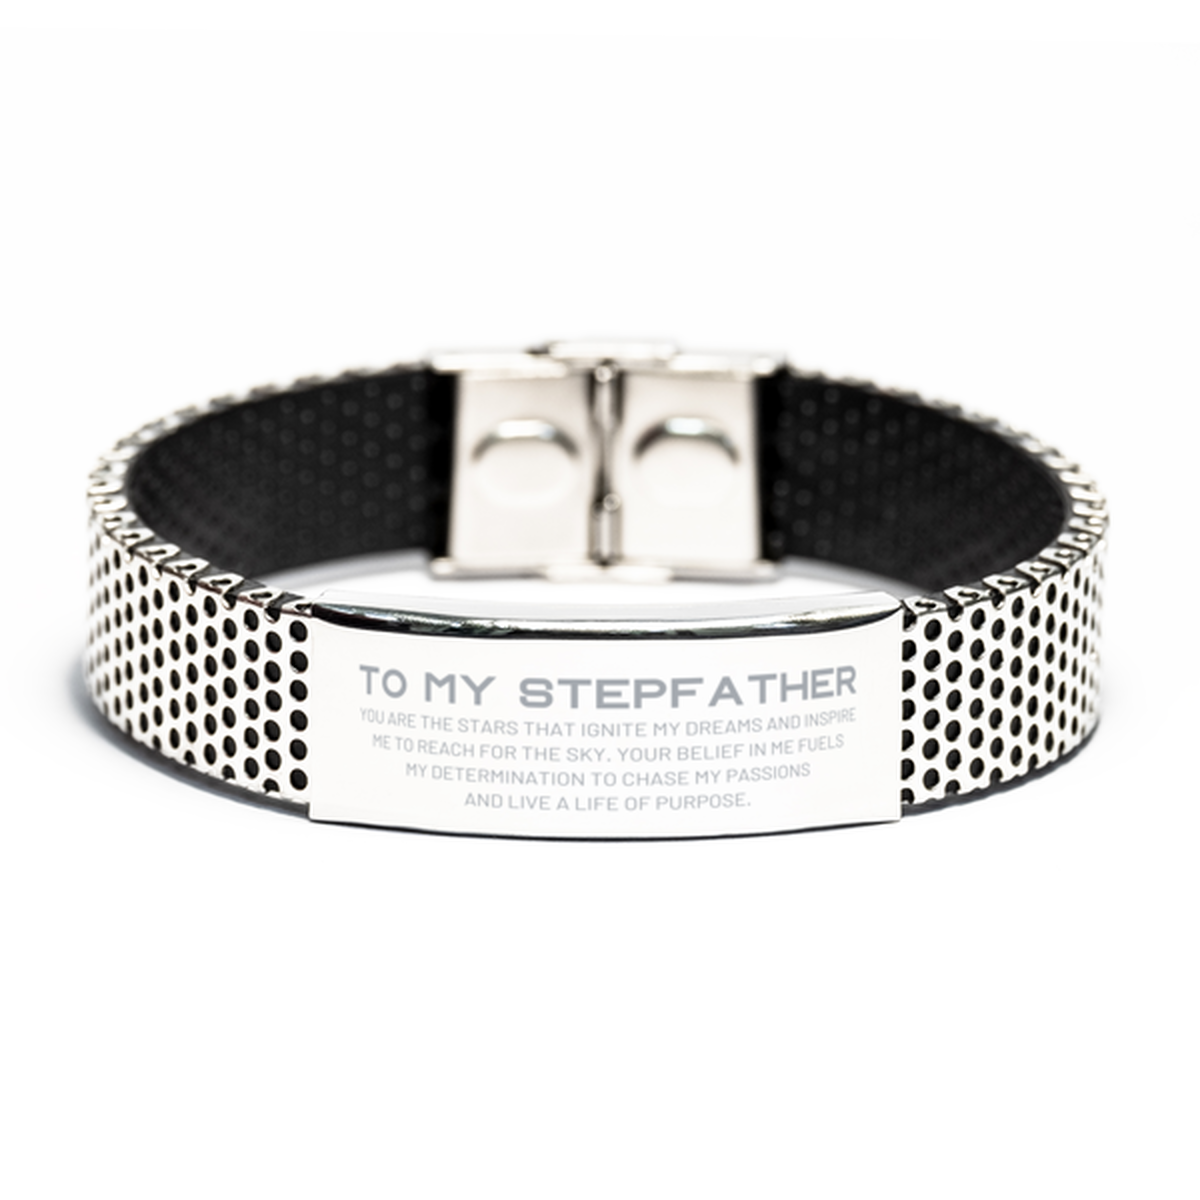 To My Stepfather Stainless Steel Bracelet, You are the stars that ignite my dreams and inspire me to reach for the sky, Birthday Unique Gifts For Stepfather, Thank You Gifts For Stepfather